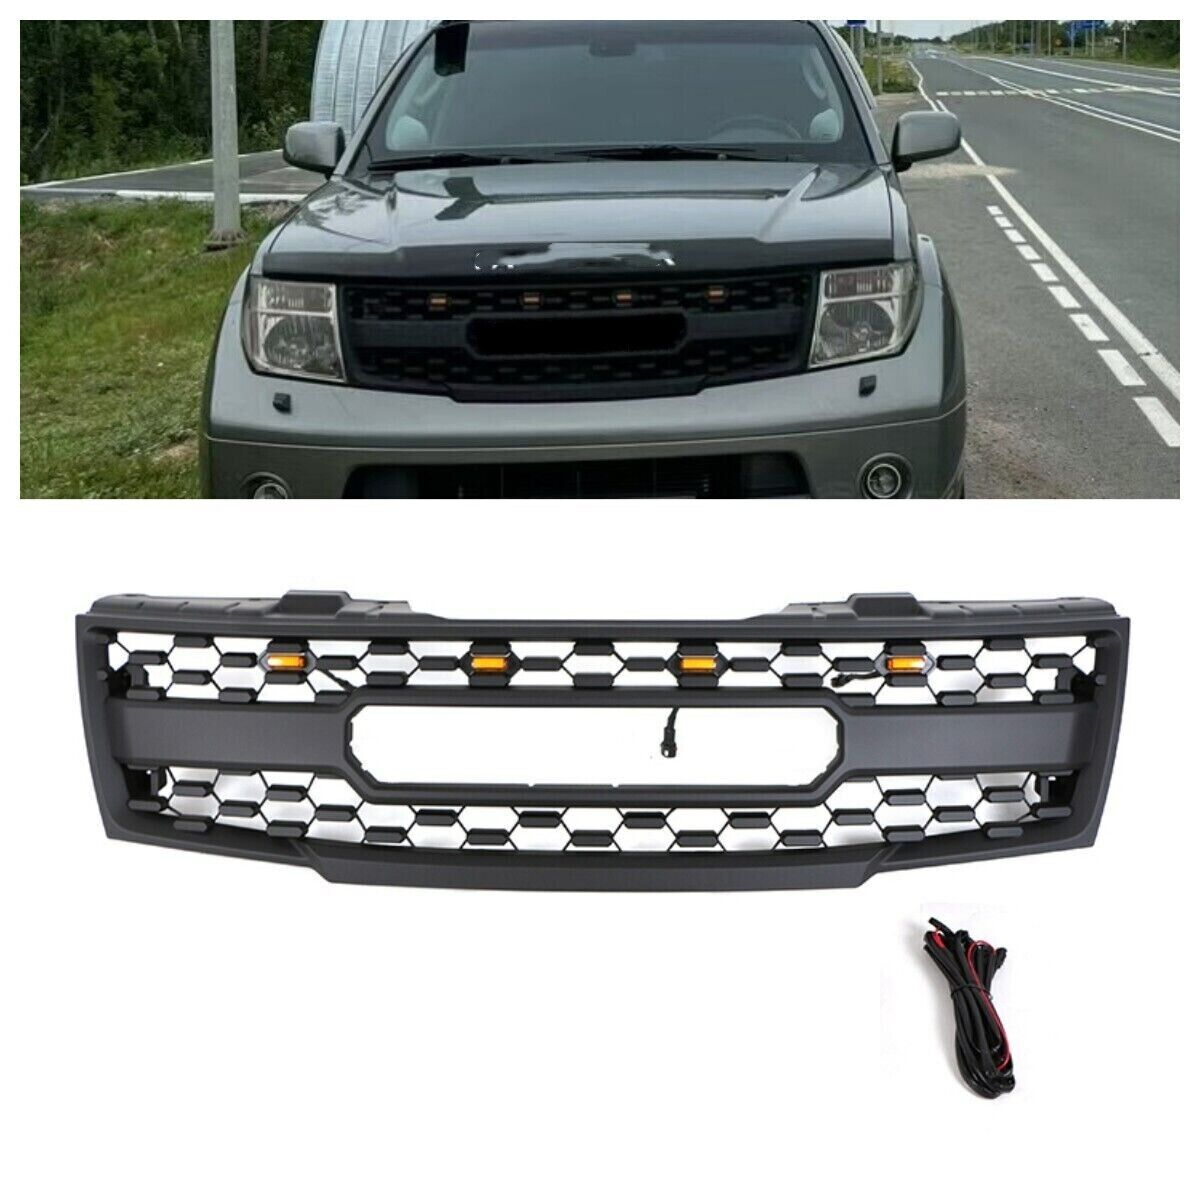 Black Front Grille Fits For  2005-2008 Nissan Frontier 05-07 Pathfinder W/Light